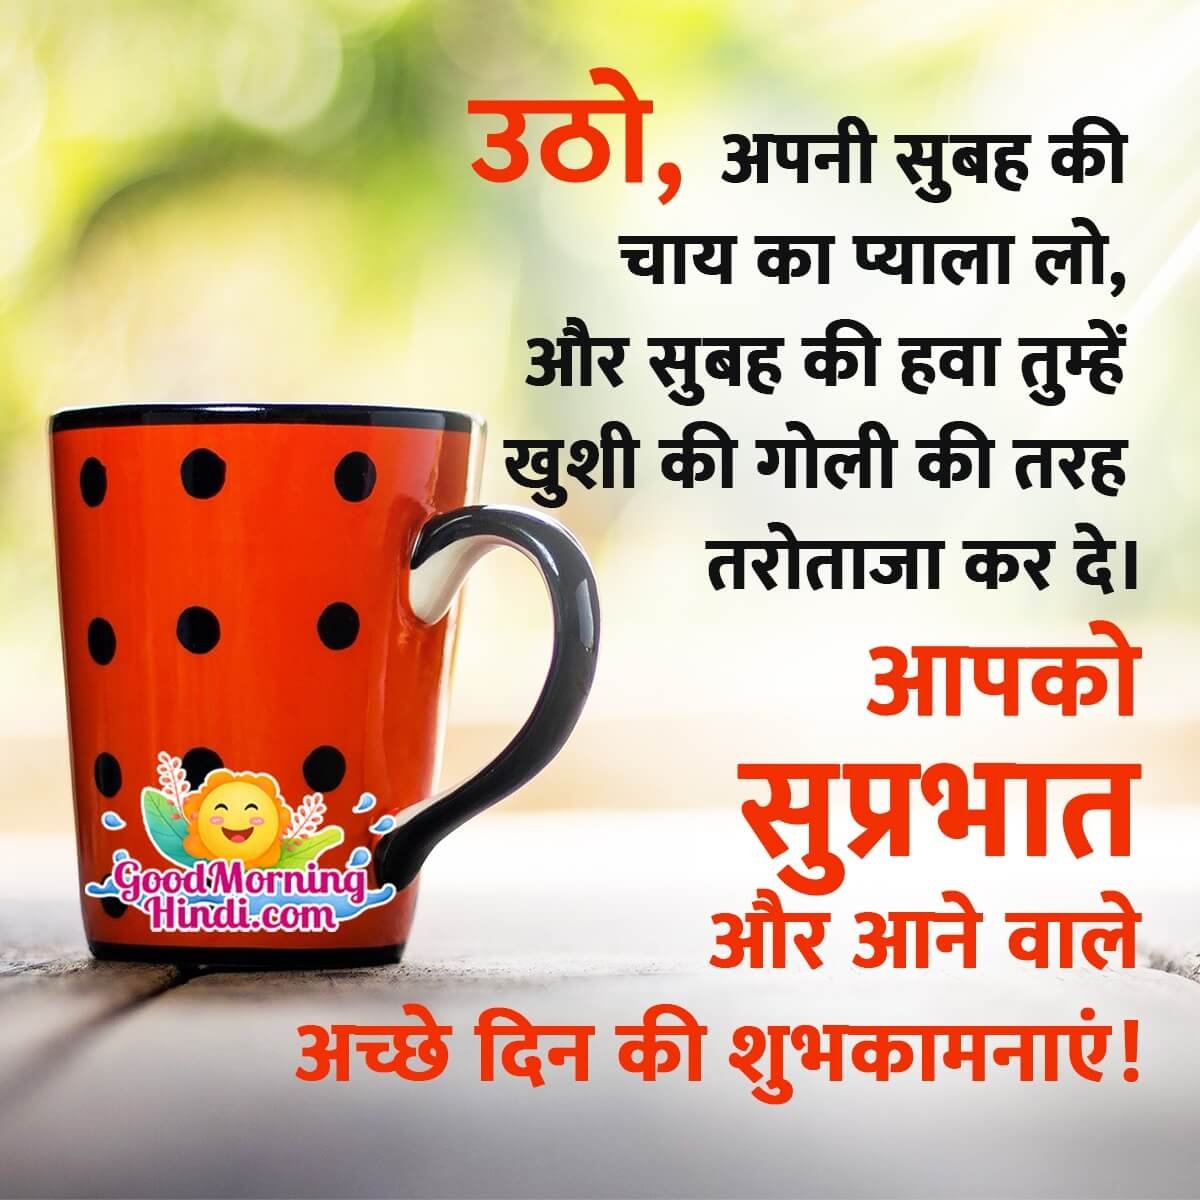 Best Good Morning Wishes In Hindi - Good Morning Wishes & Images ...